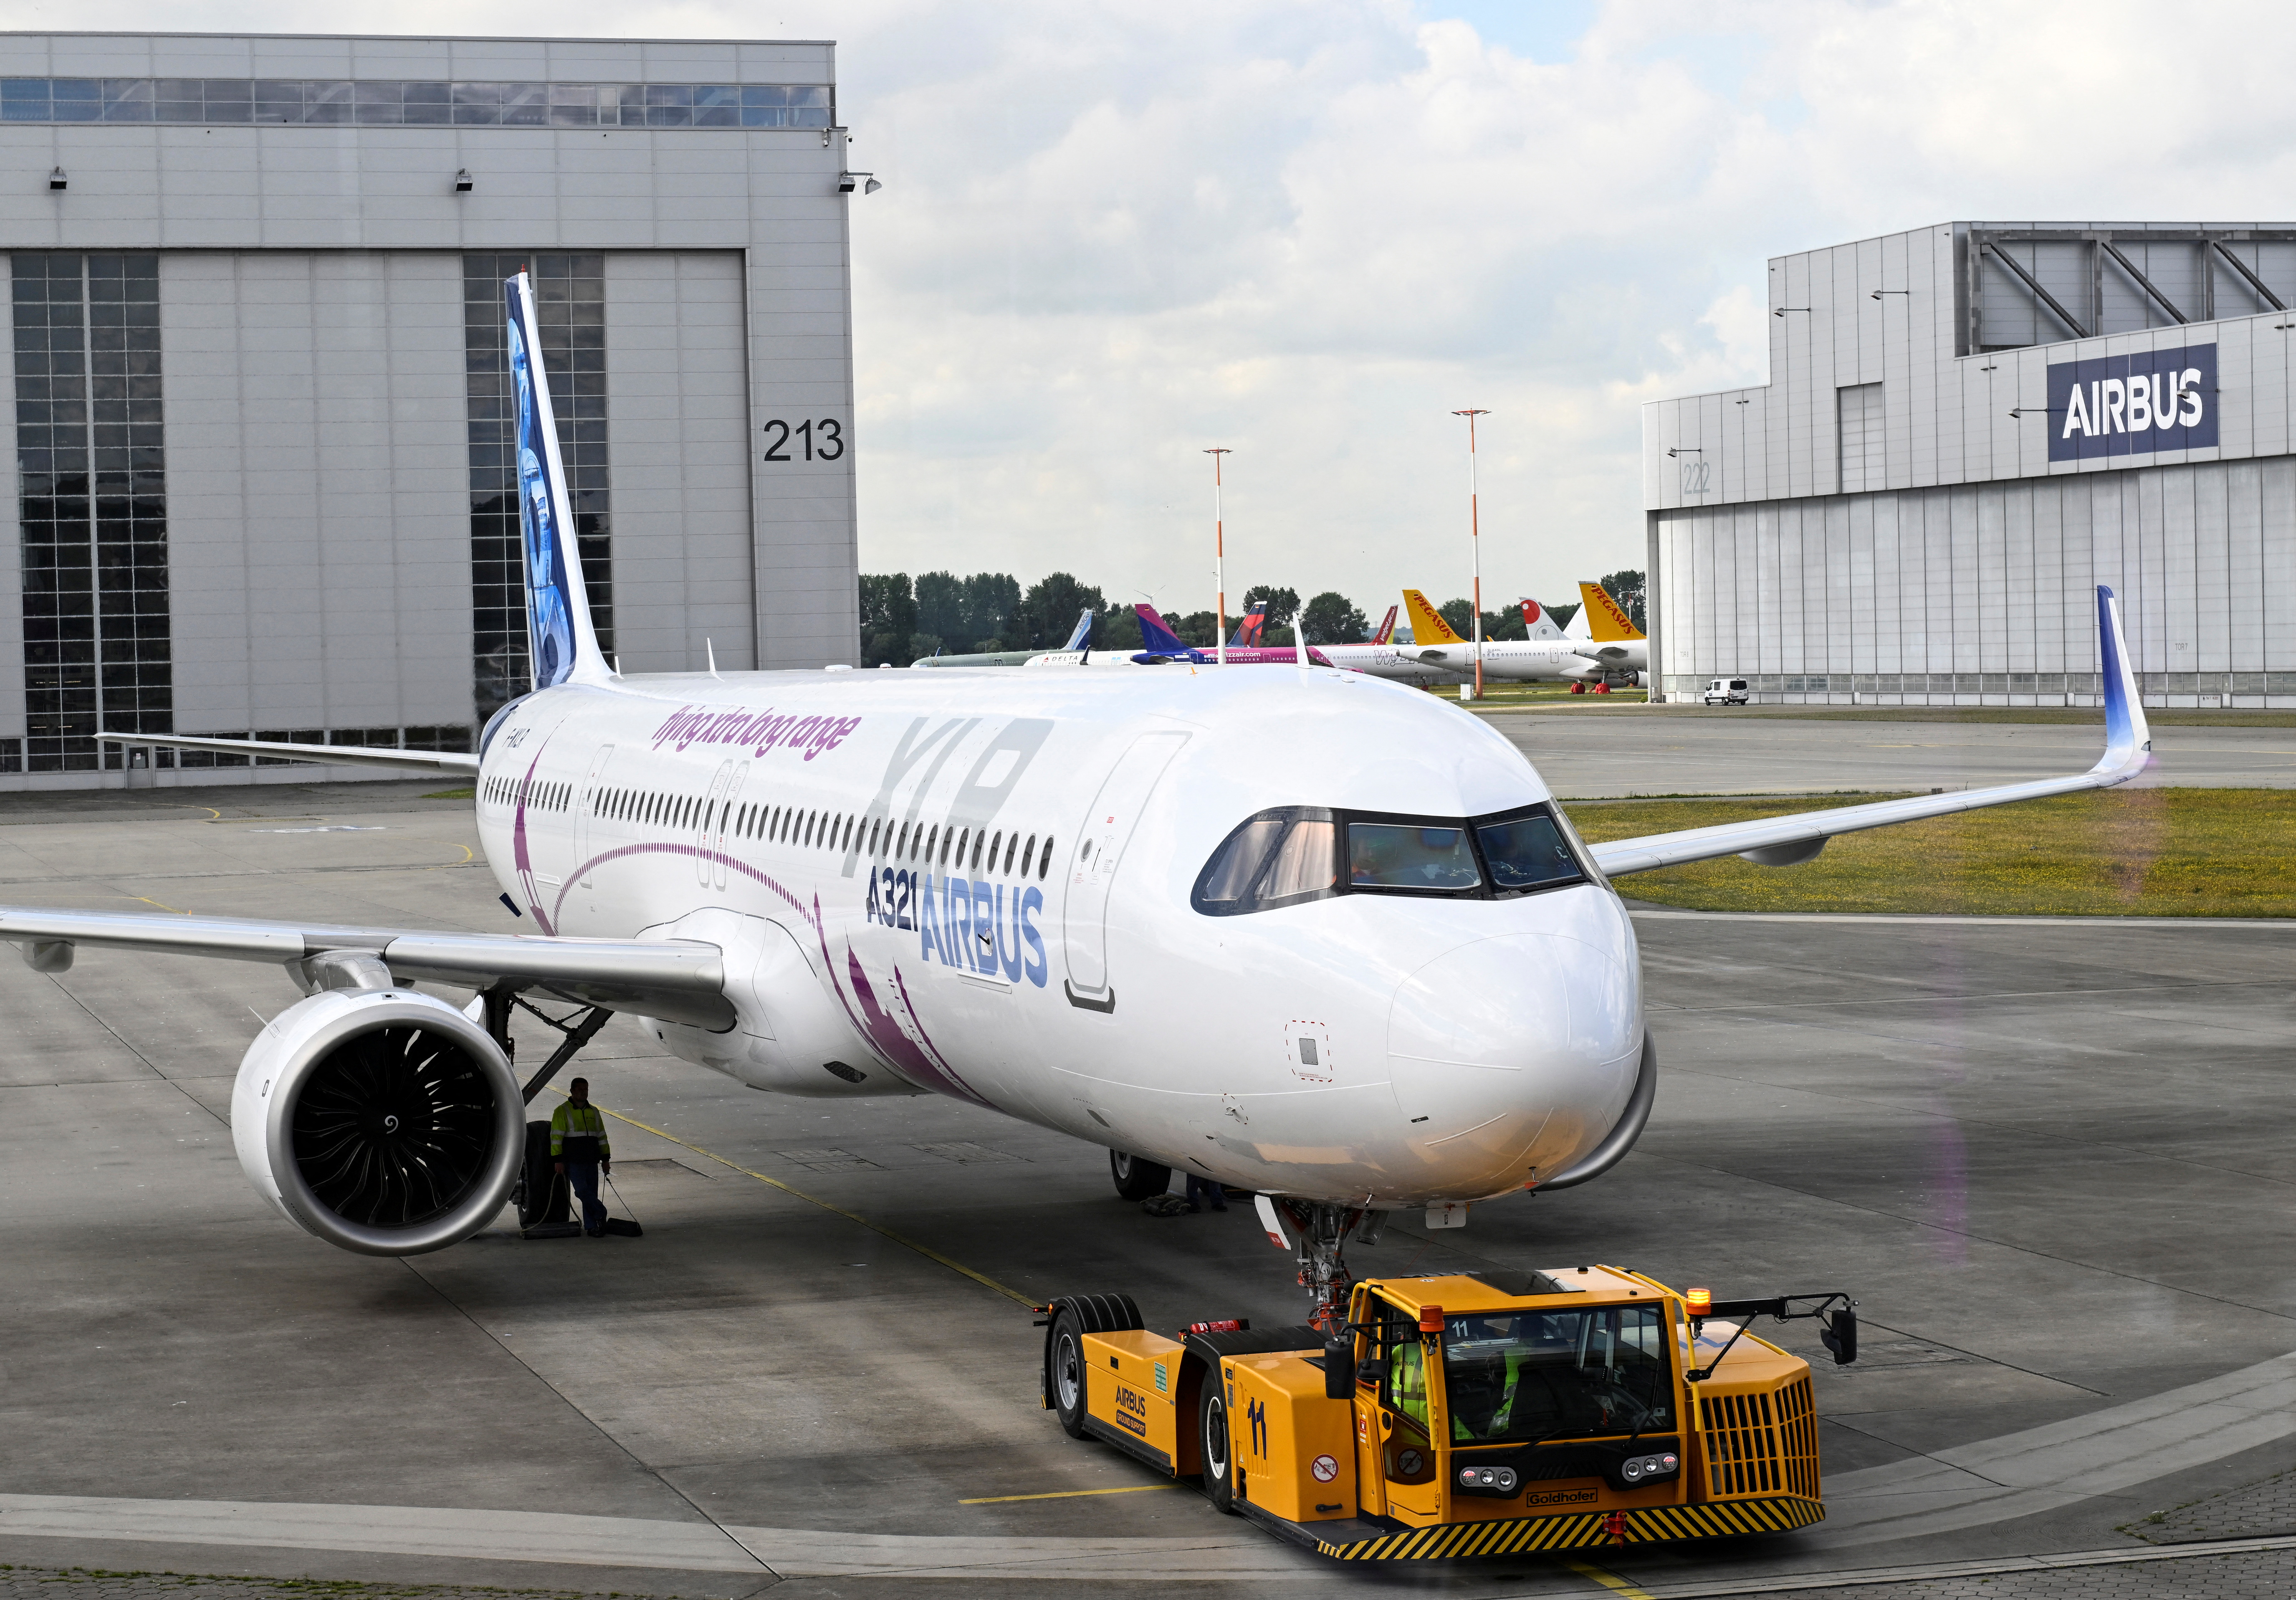 Airbus A321XLR is being prepared before take-off for its maiden flight at Hamburg-Finkenwerder Airport